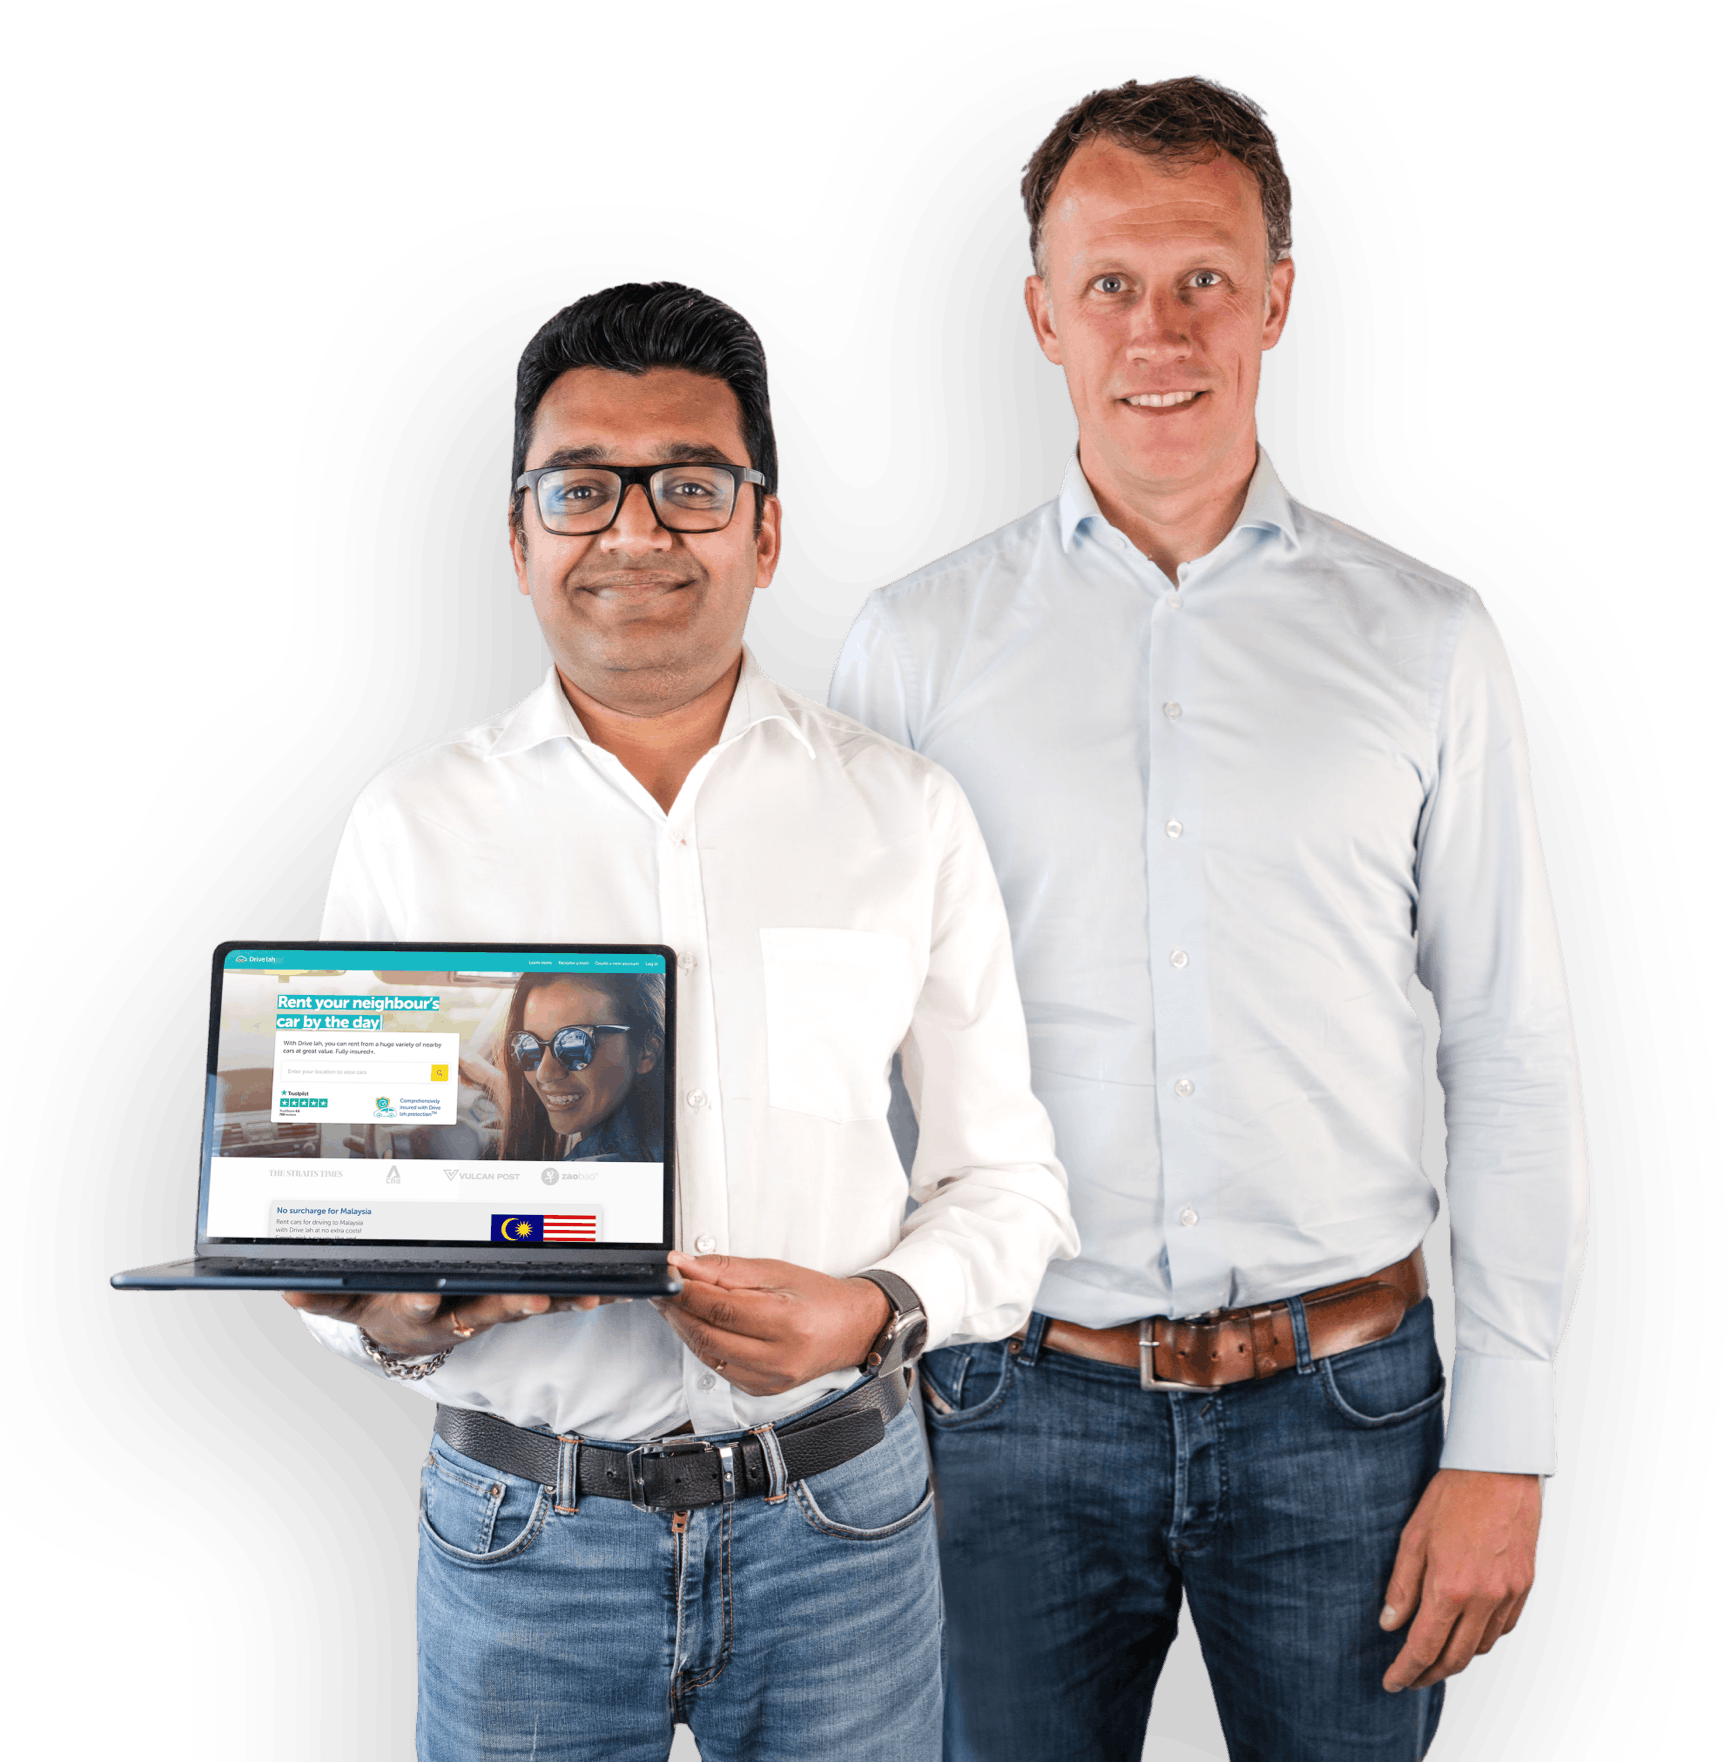 Drive lah founders Gaurav Singhal and Dirk-Jan der Horst. Both founders are smiling and wearing light button-down shirts and jeans. Gaurav is holding a laptop that's open to the Drive lah home page.